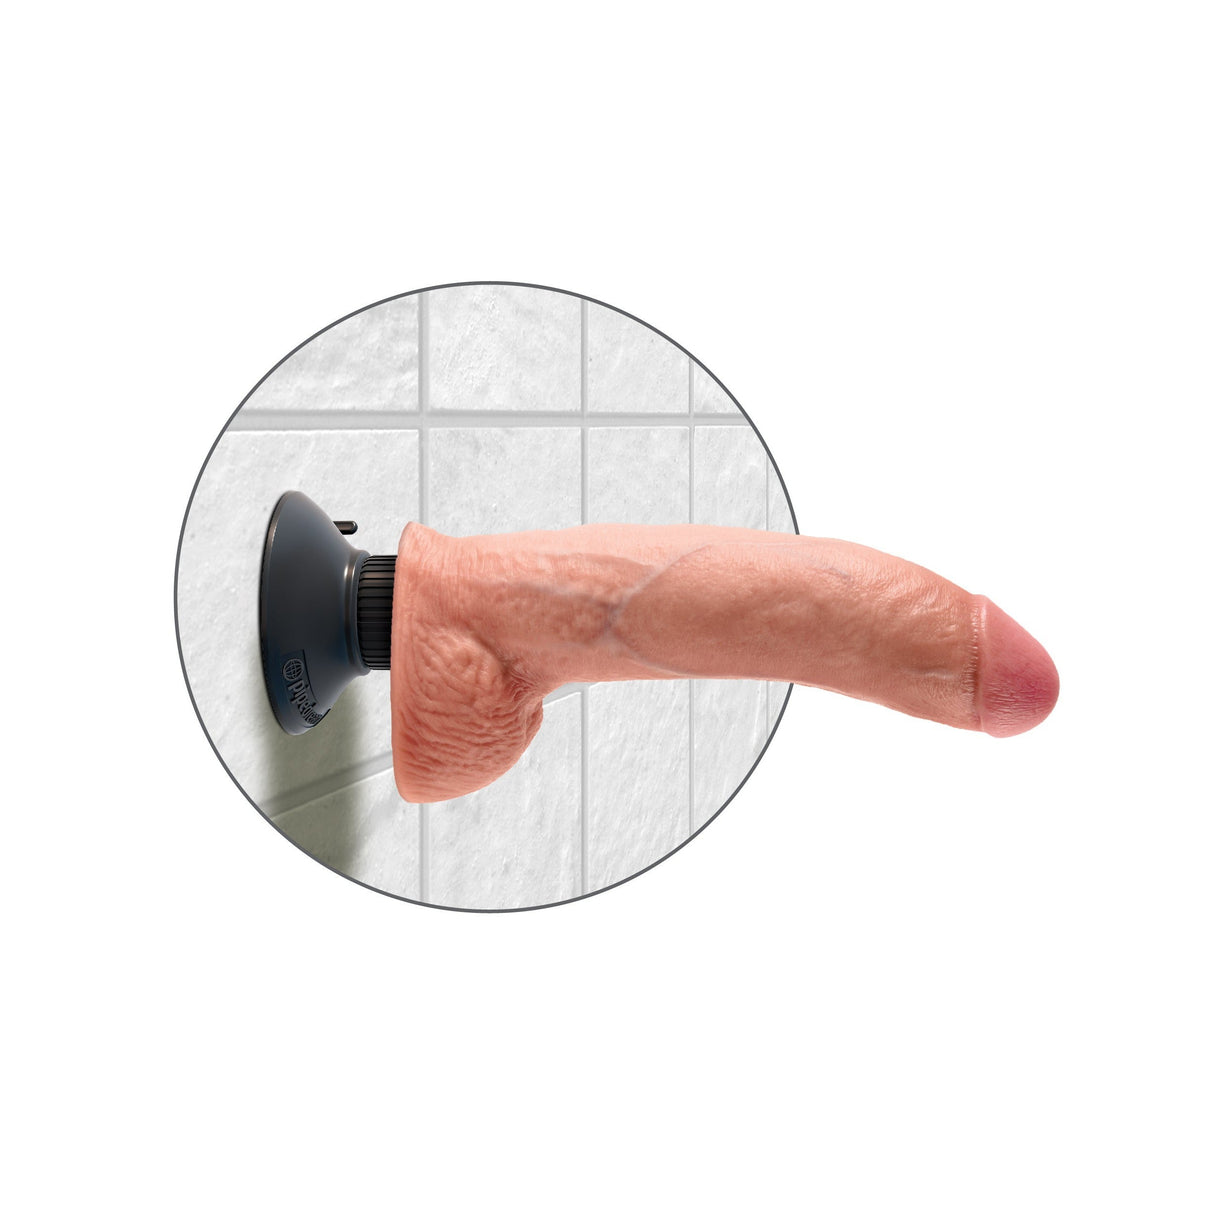 King Cock 9 Inch Vibrating Dildo with Balls